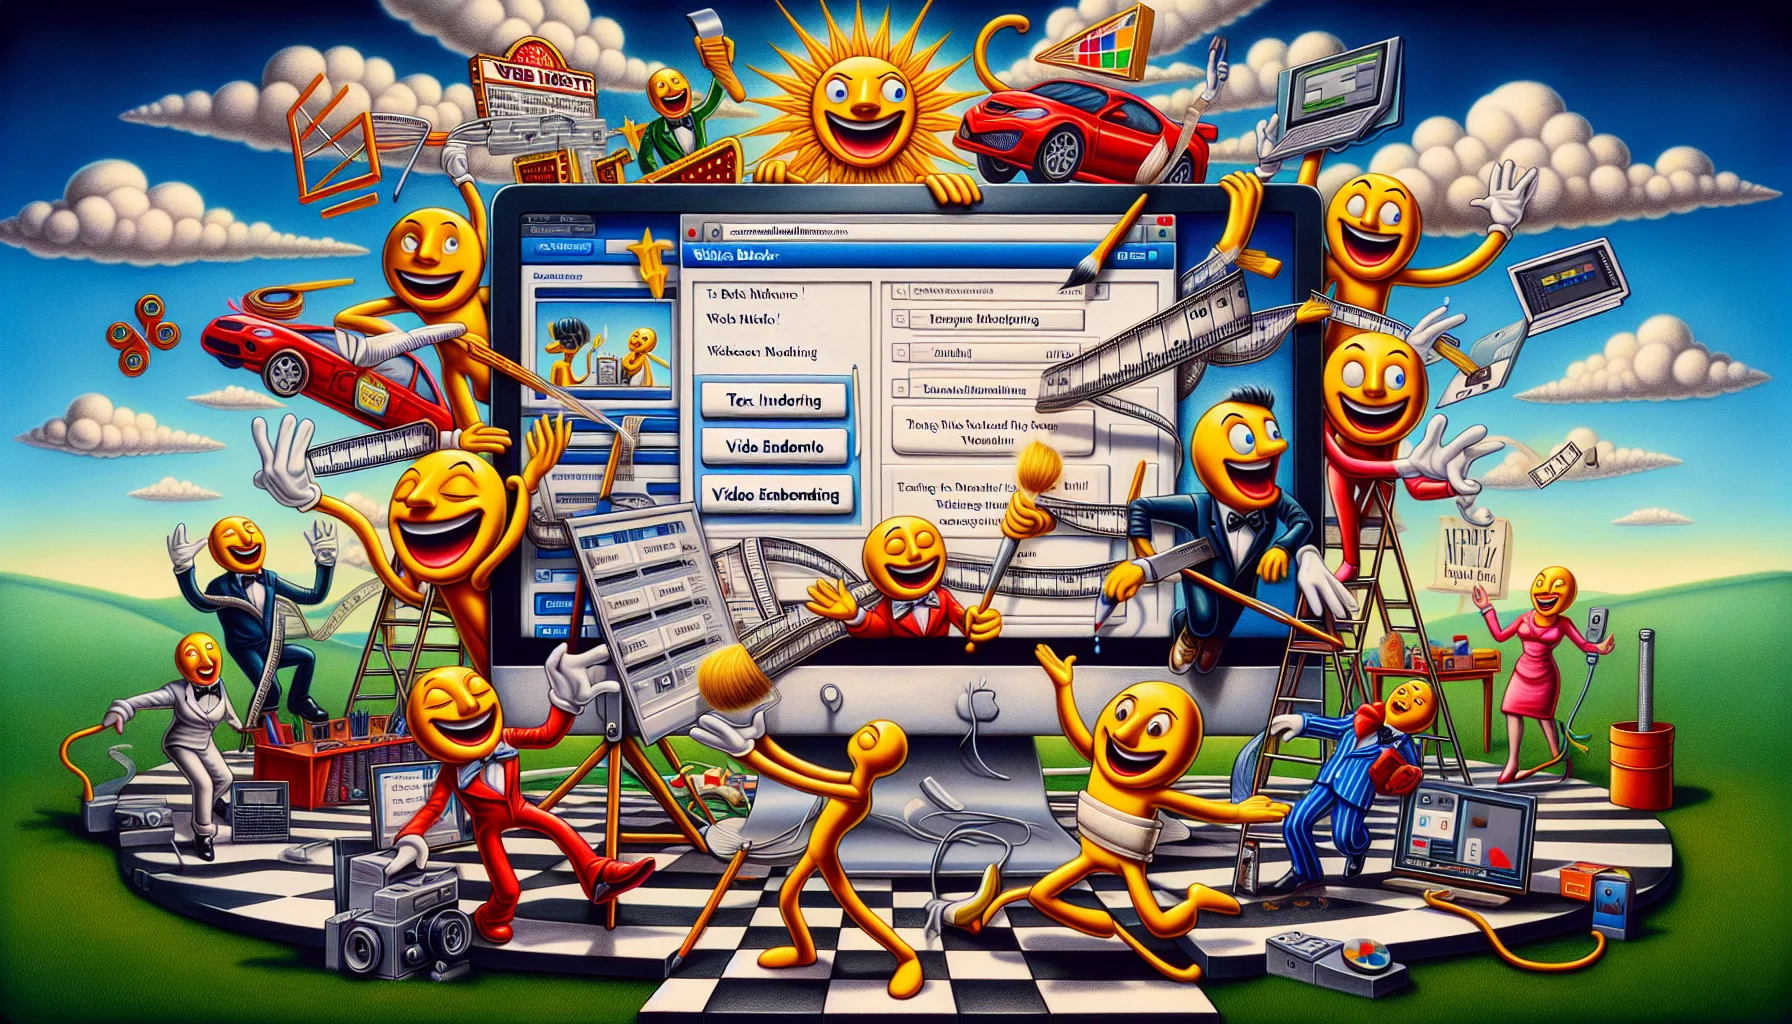 A vividly detailed image depicting a humorous scene about website building for beginners. In the center, a large computer monitor displays an easy-to-use, intuitive interface of a website builder, with drag and drop modules for text formatting, image inserting, video embedding, and template selection. Surrounding the monitor, a cast of anthropomorphized tools commonly associated with website construction: a laughing 'text module' juggling fonts, a 'video module' creating a Hollywood blockbuster, and a 'template module' dressing up like a fashion designer. On the background, subtle cloud figures imply web hosting, with some of them playfully racing as if to signify speed and reliability.